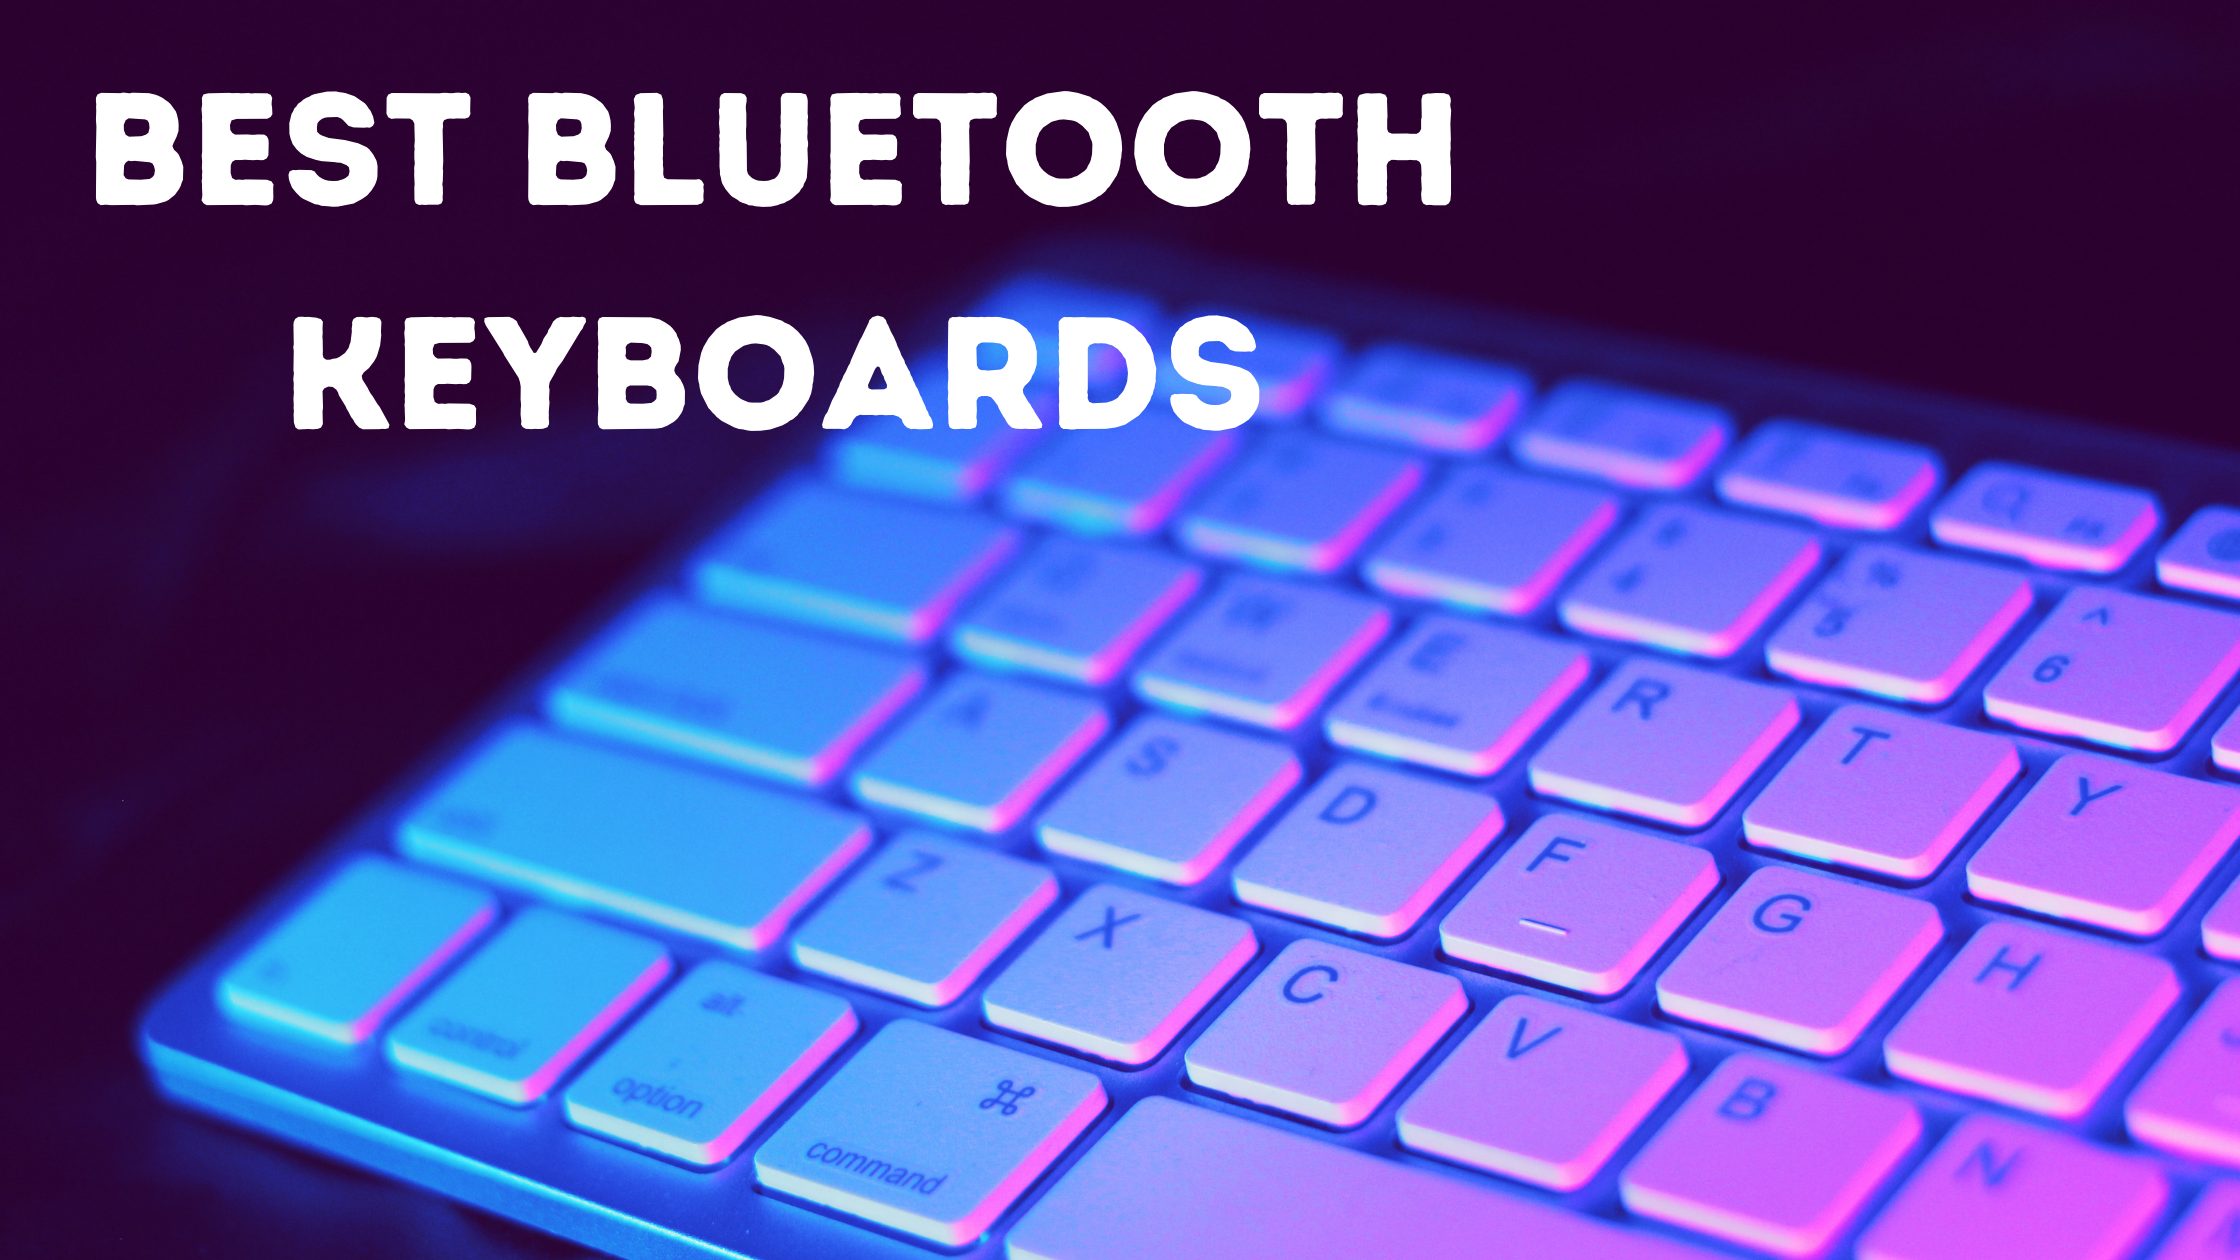 Best Bluetooth Keyboards – Buyer’s Guide & Reviews